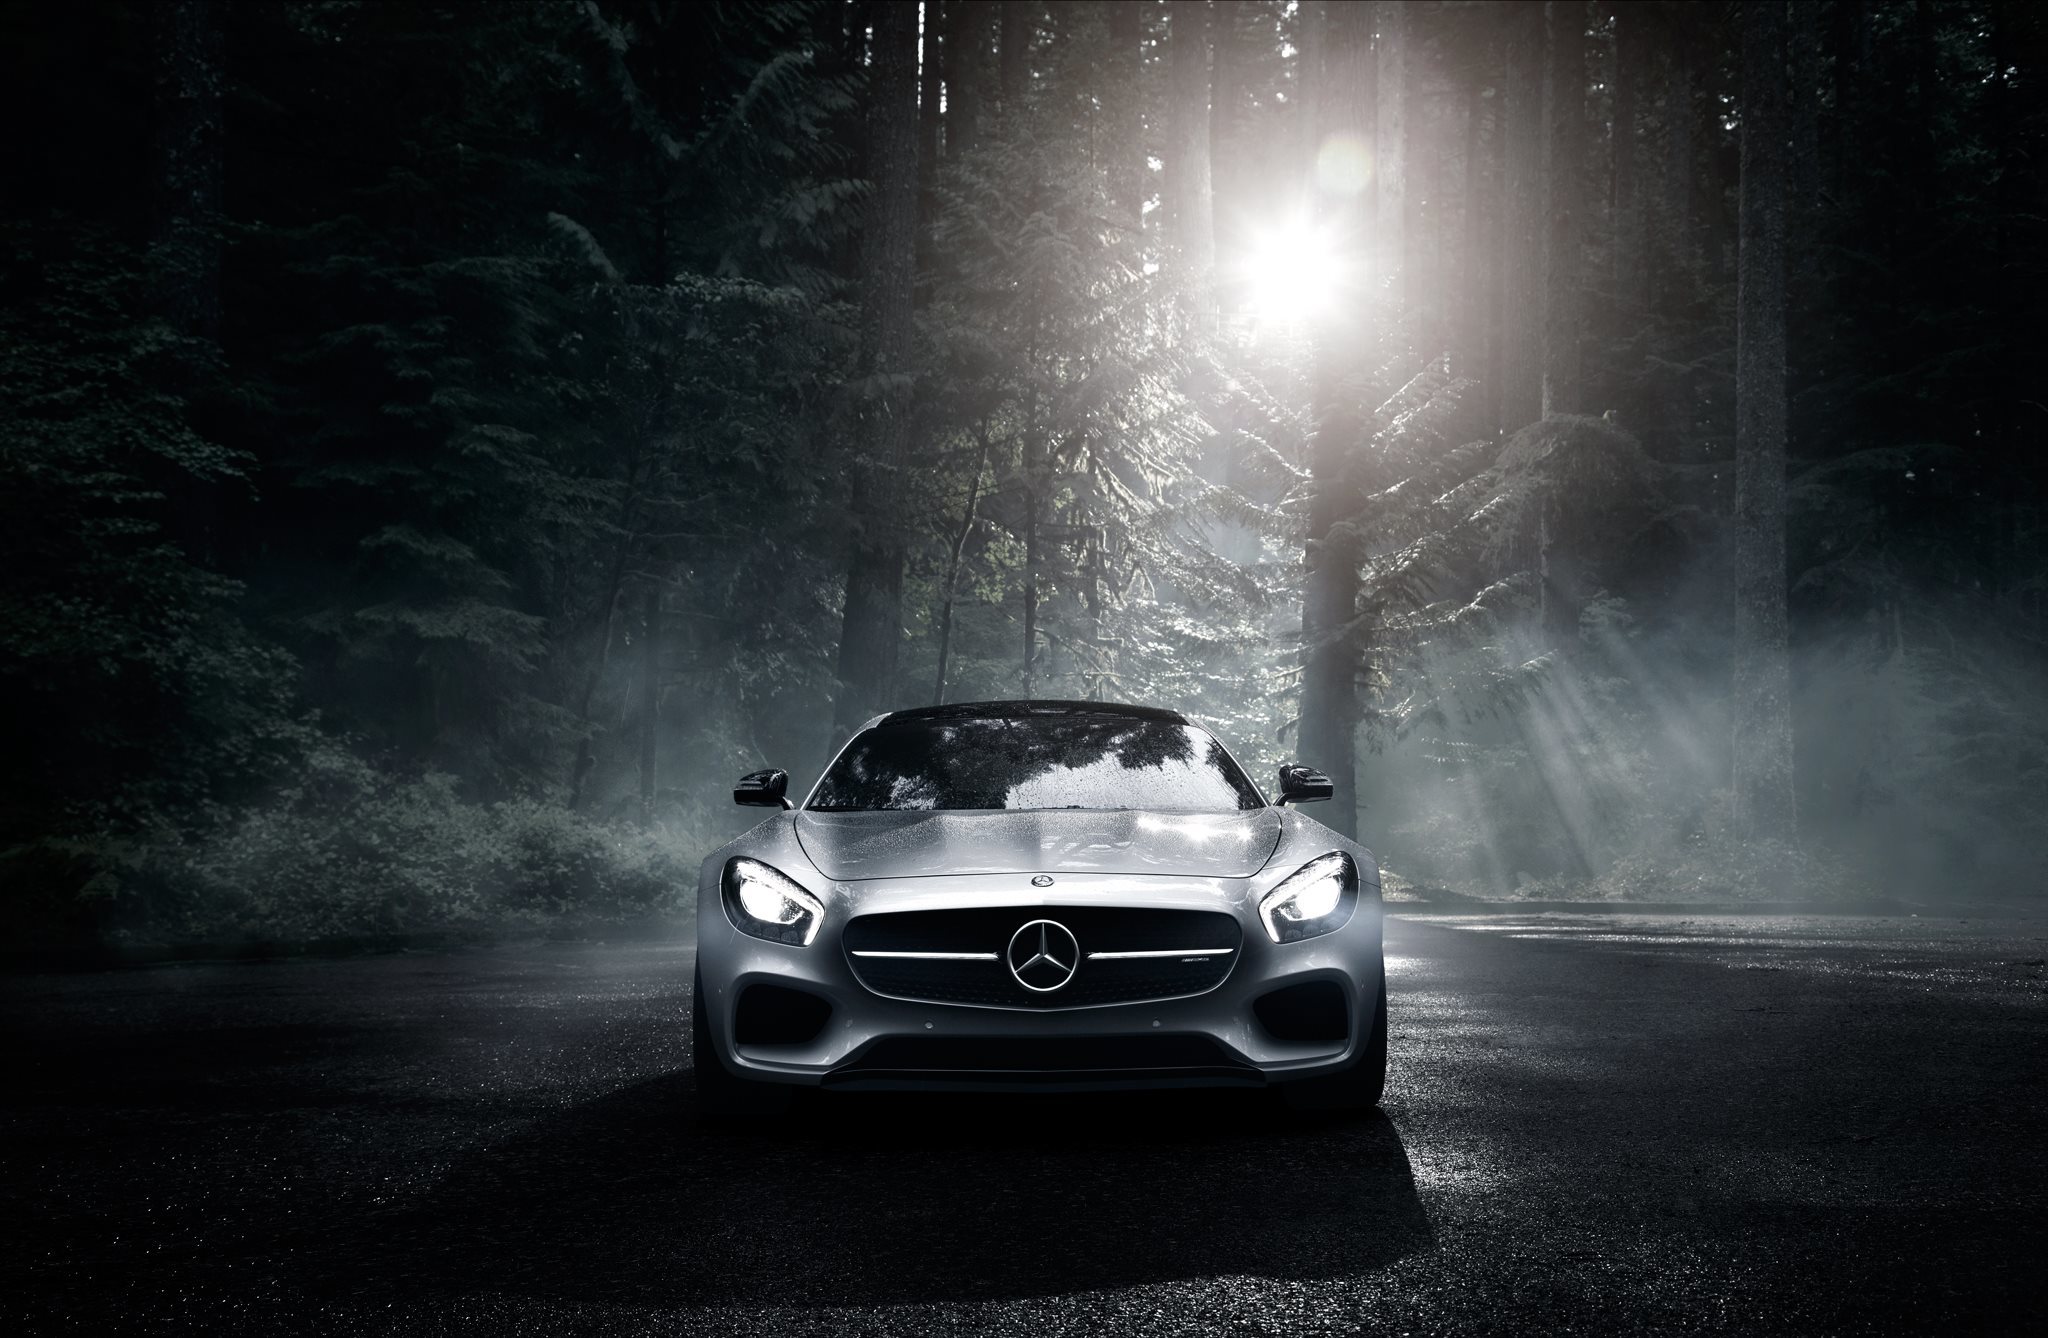 mercedes benz, cars, gt s, night, forest, front view, amg, silver, silvery, 2016